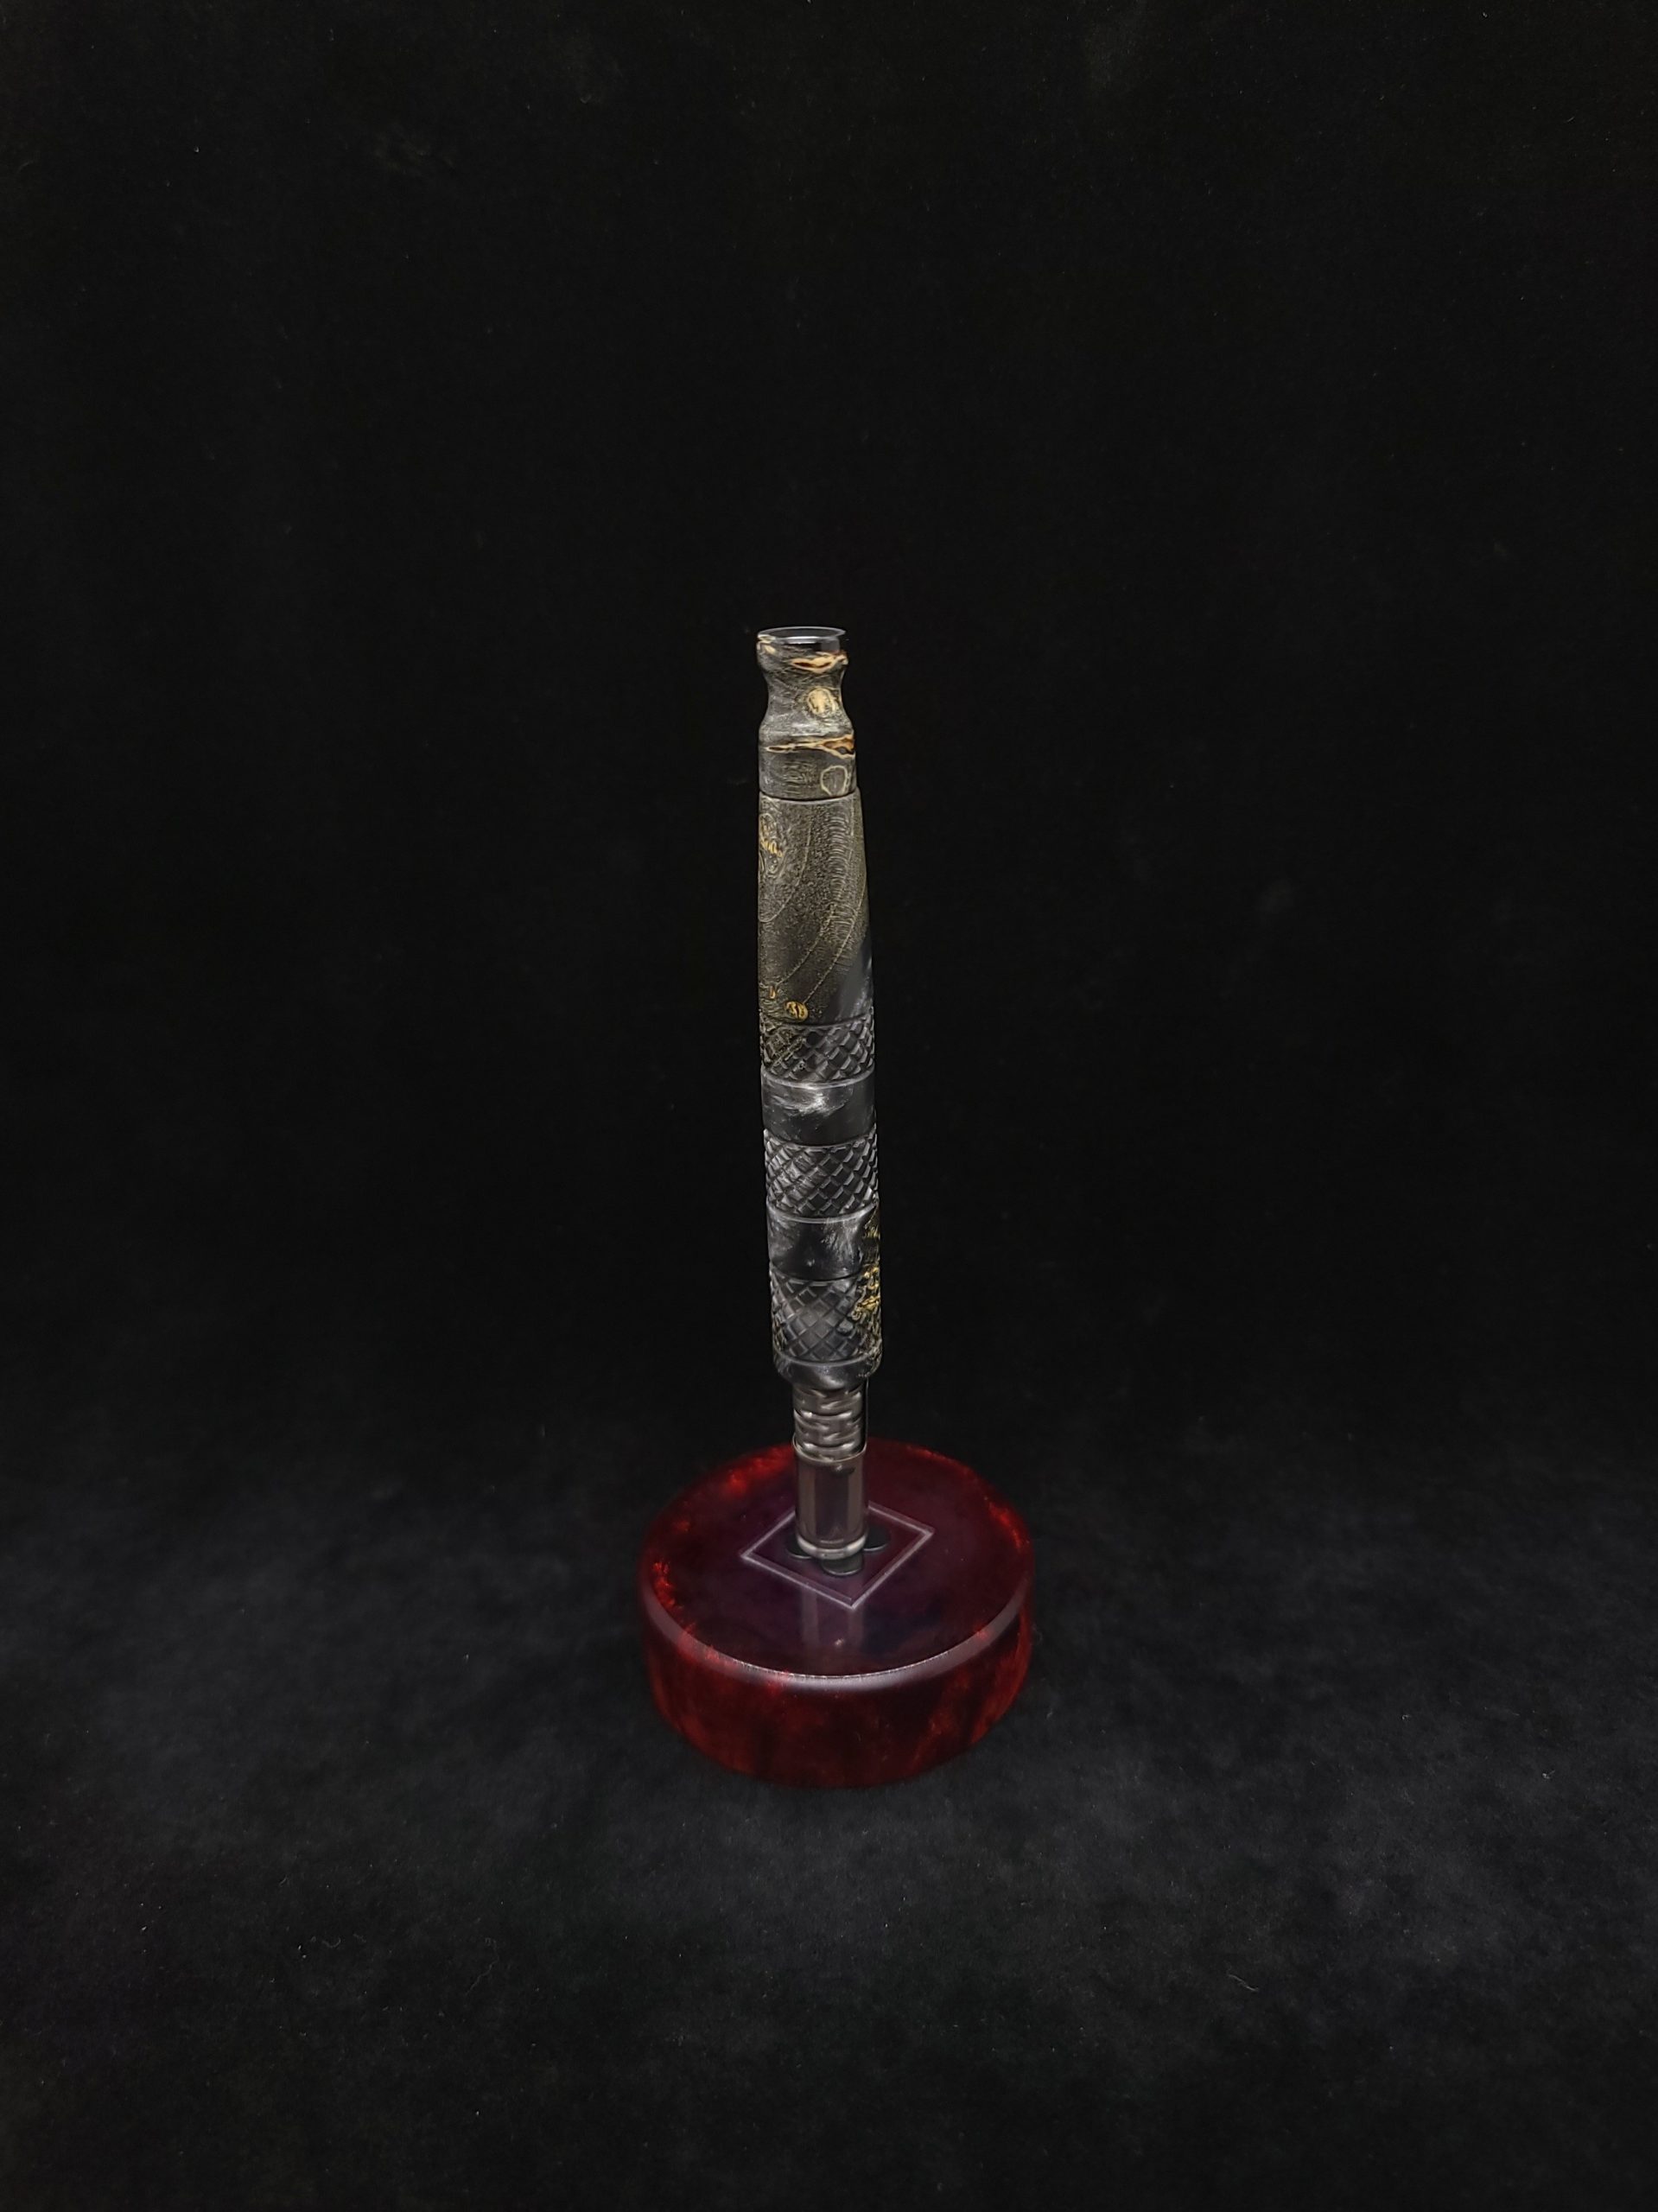 This image portrays High Class-Knurled XL Dynavap Stem/Gun Metal Burl Hybrid + Matching Mouthpiece by Dovetail Woodwork.